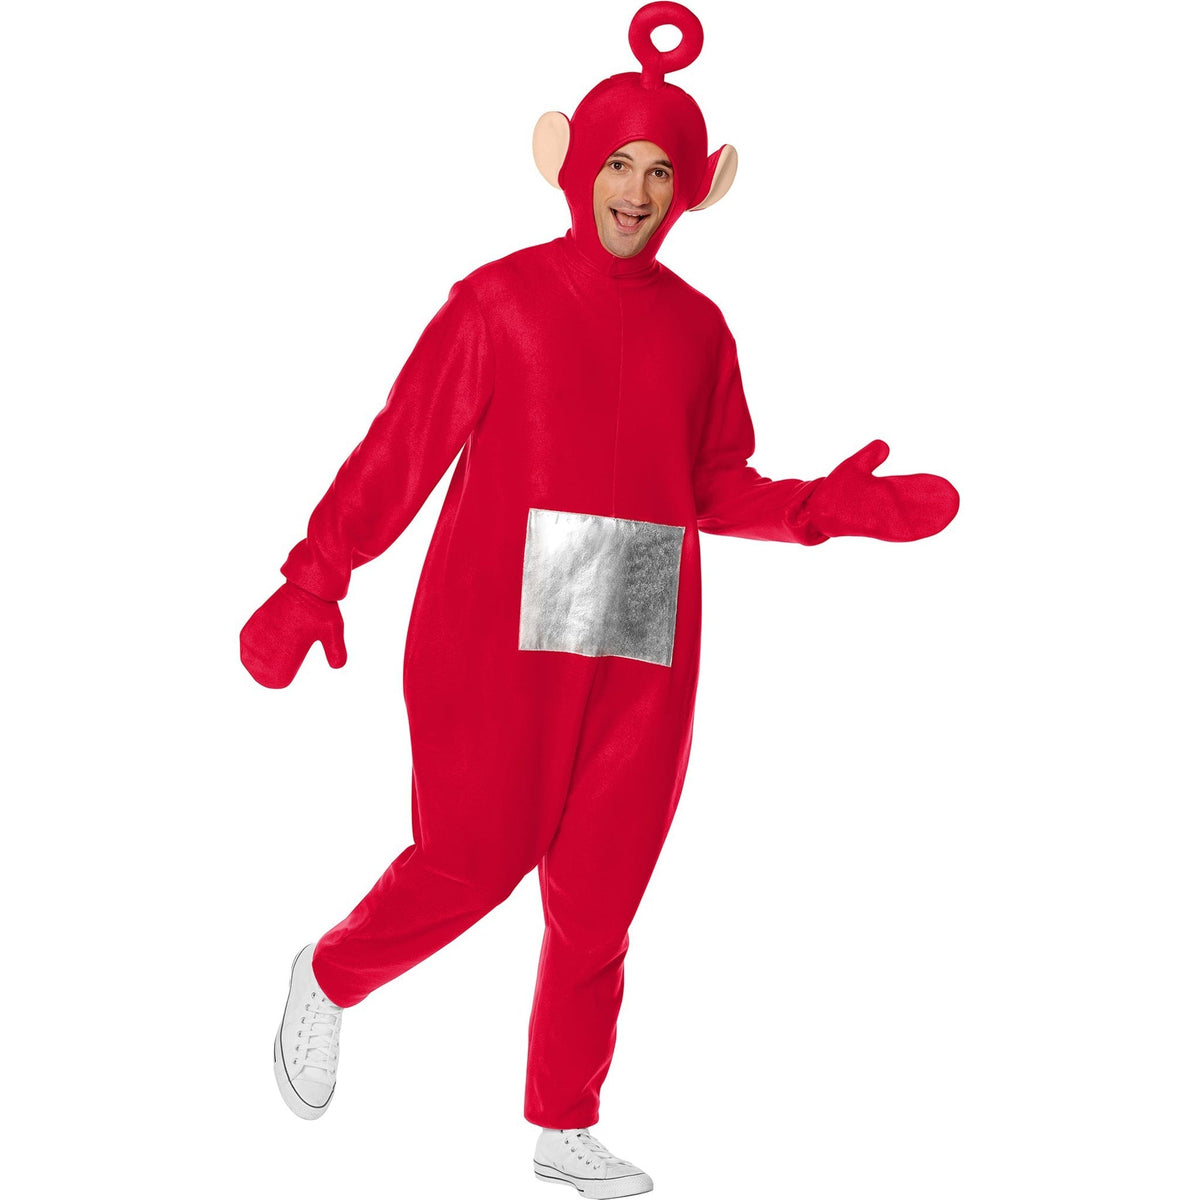 IN SPIRIT DESIGNS Costumes Po Costume for Adults, Teletubbies, Red Jumpsuit With Hood